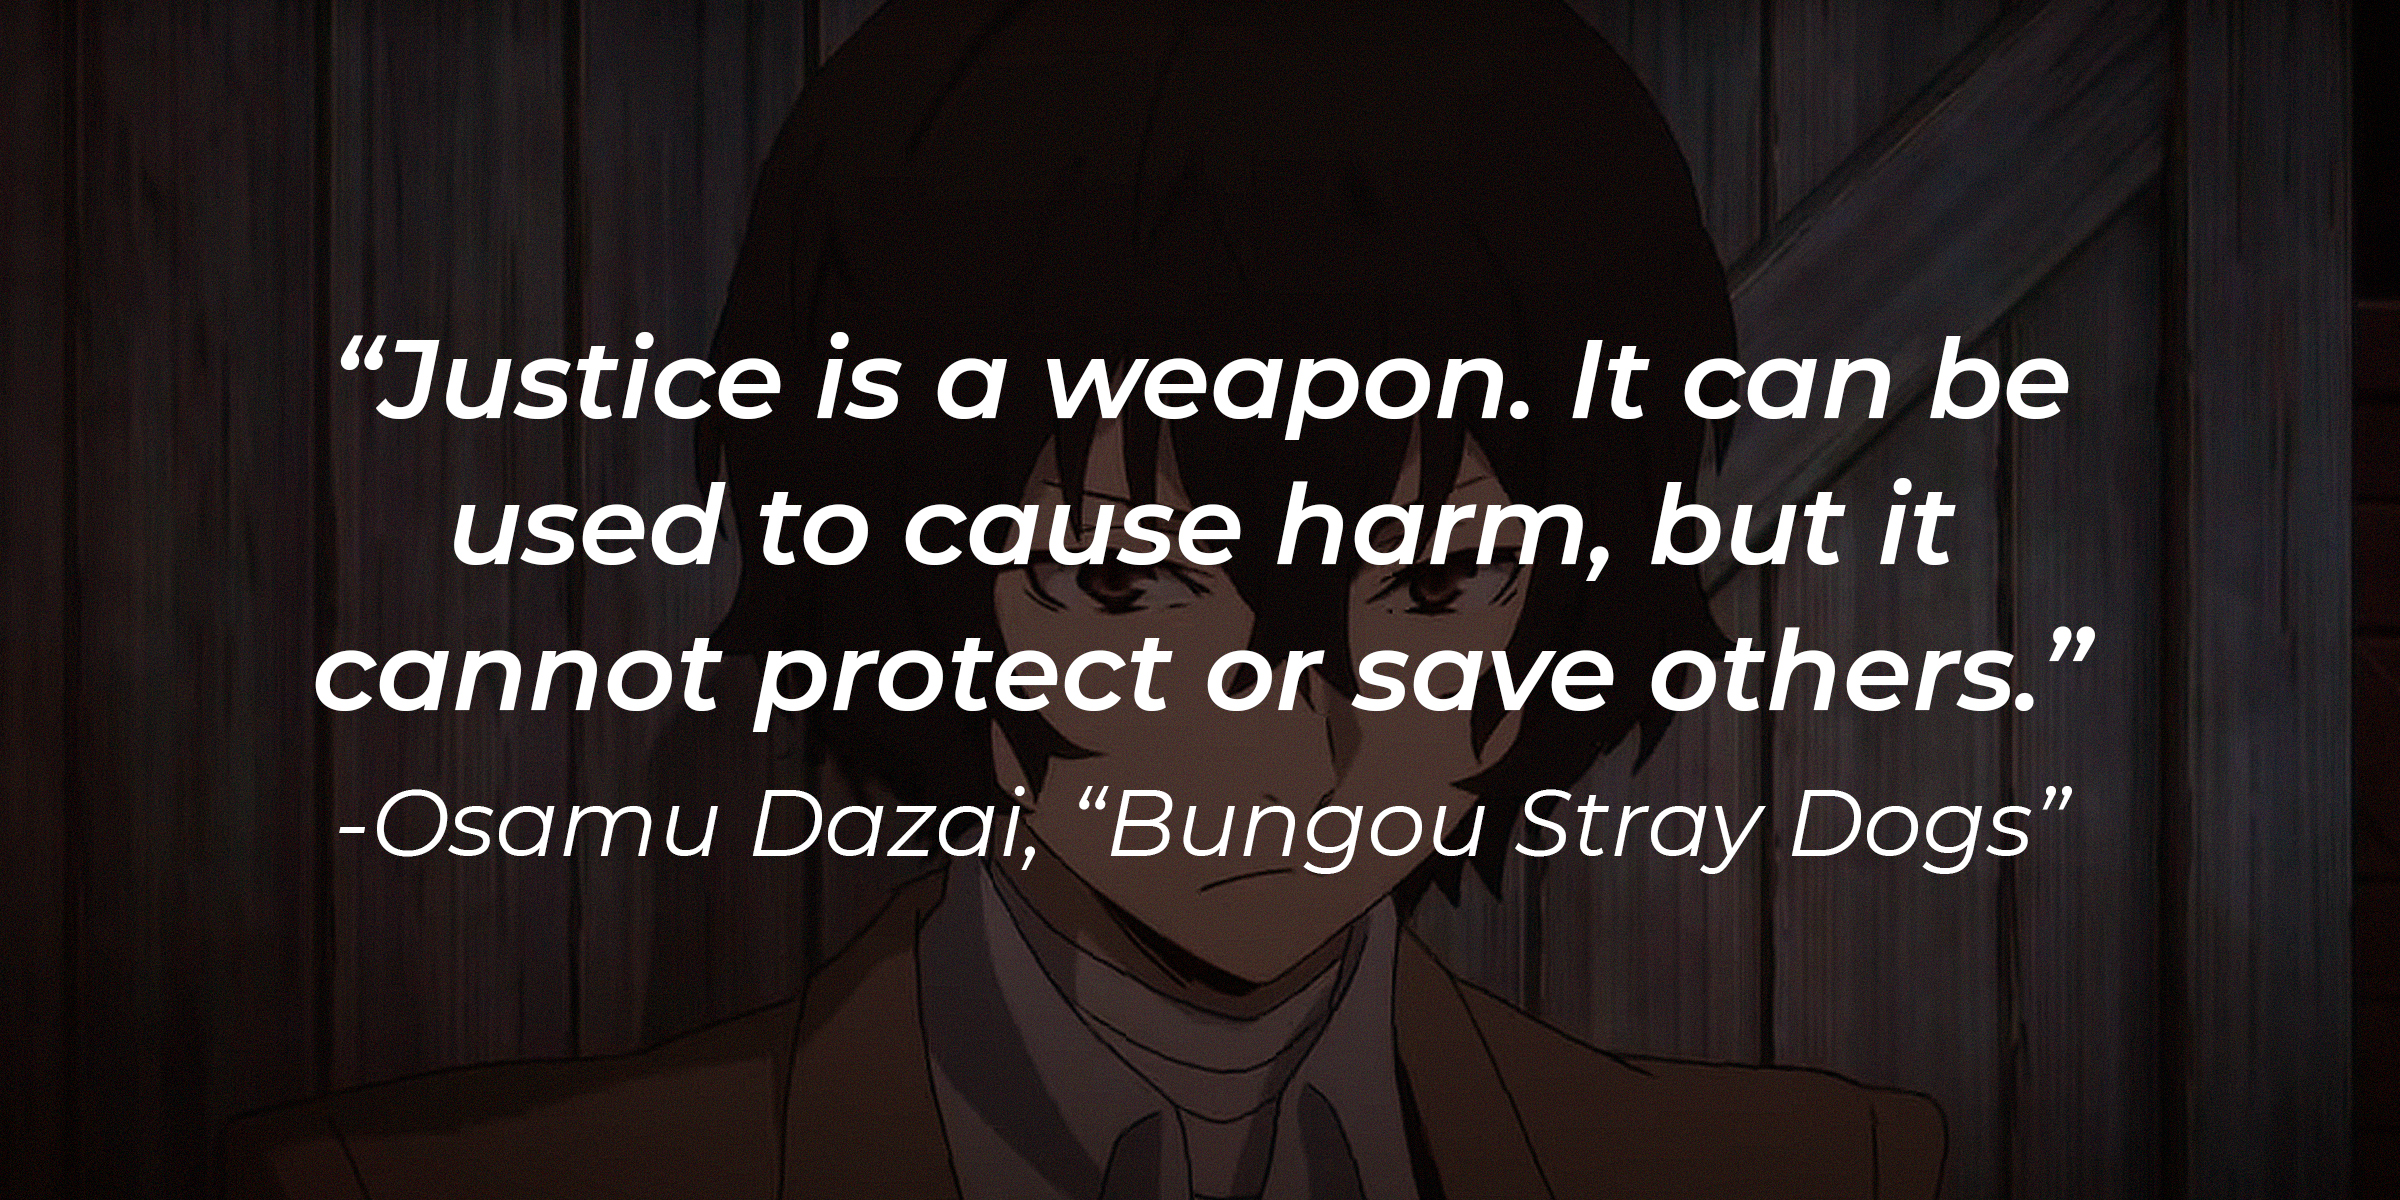 Osamu Dazai's quote: "Justice is a weapon. It can be used to cause harm, but it cannot protect or save others.” | Image: youtube.com/Crunchyroll Collection